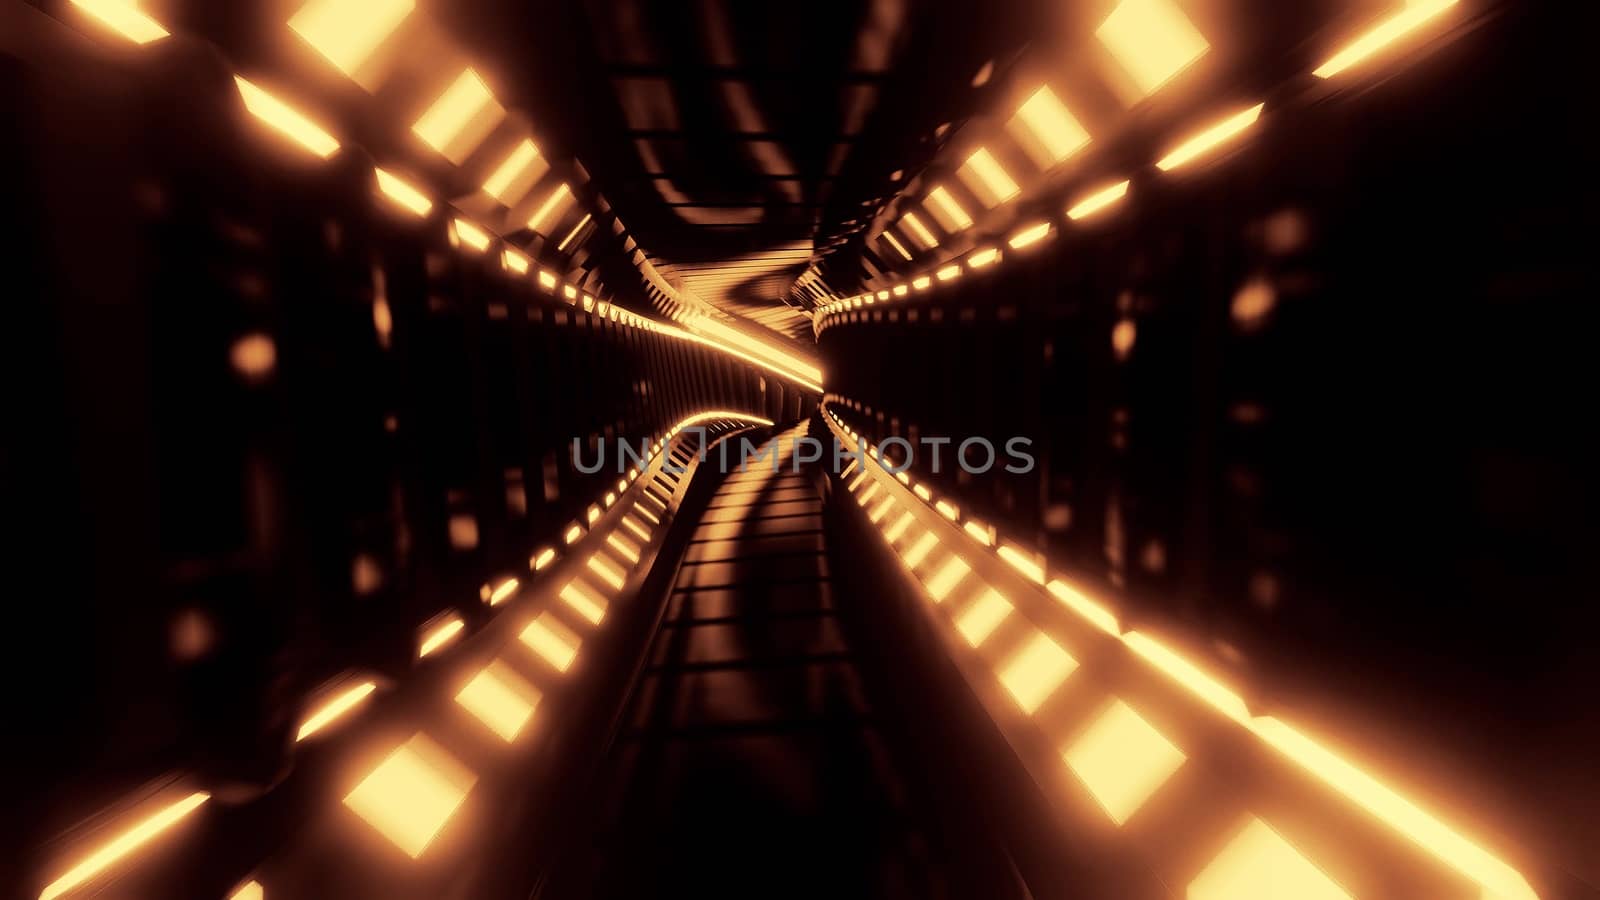 abstract reflective design tunnel corridor 3d illustration wallpaper background by tunnelmotions